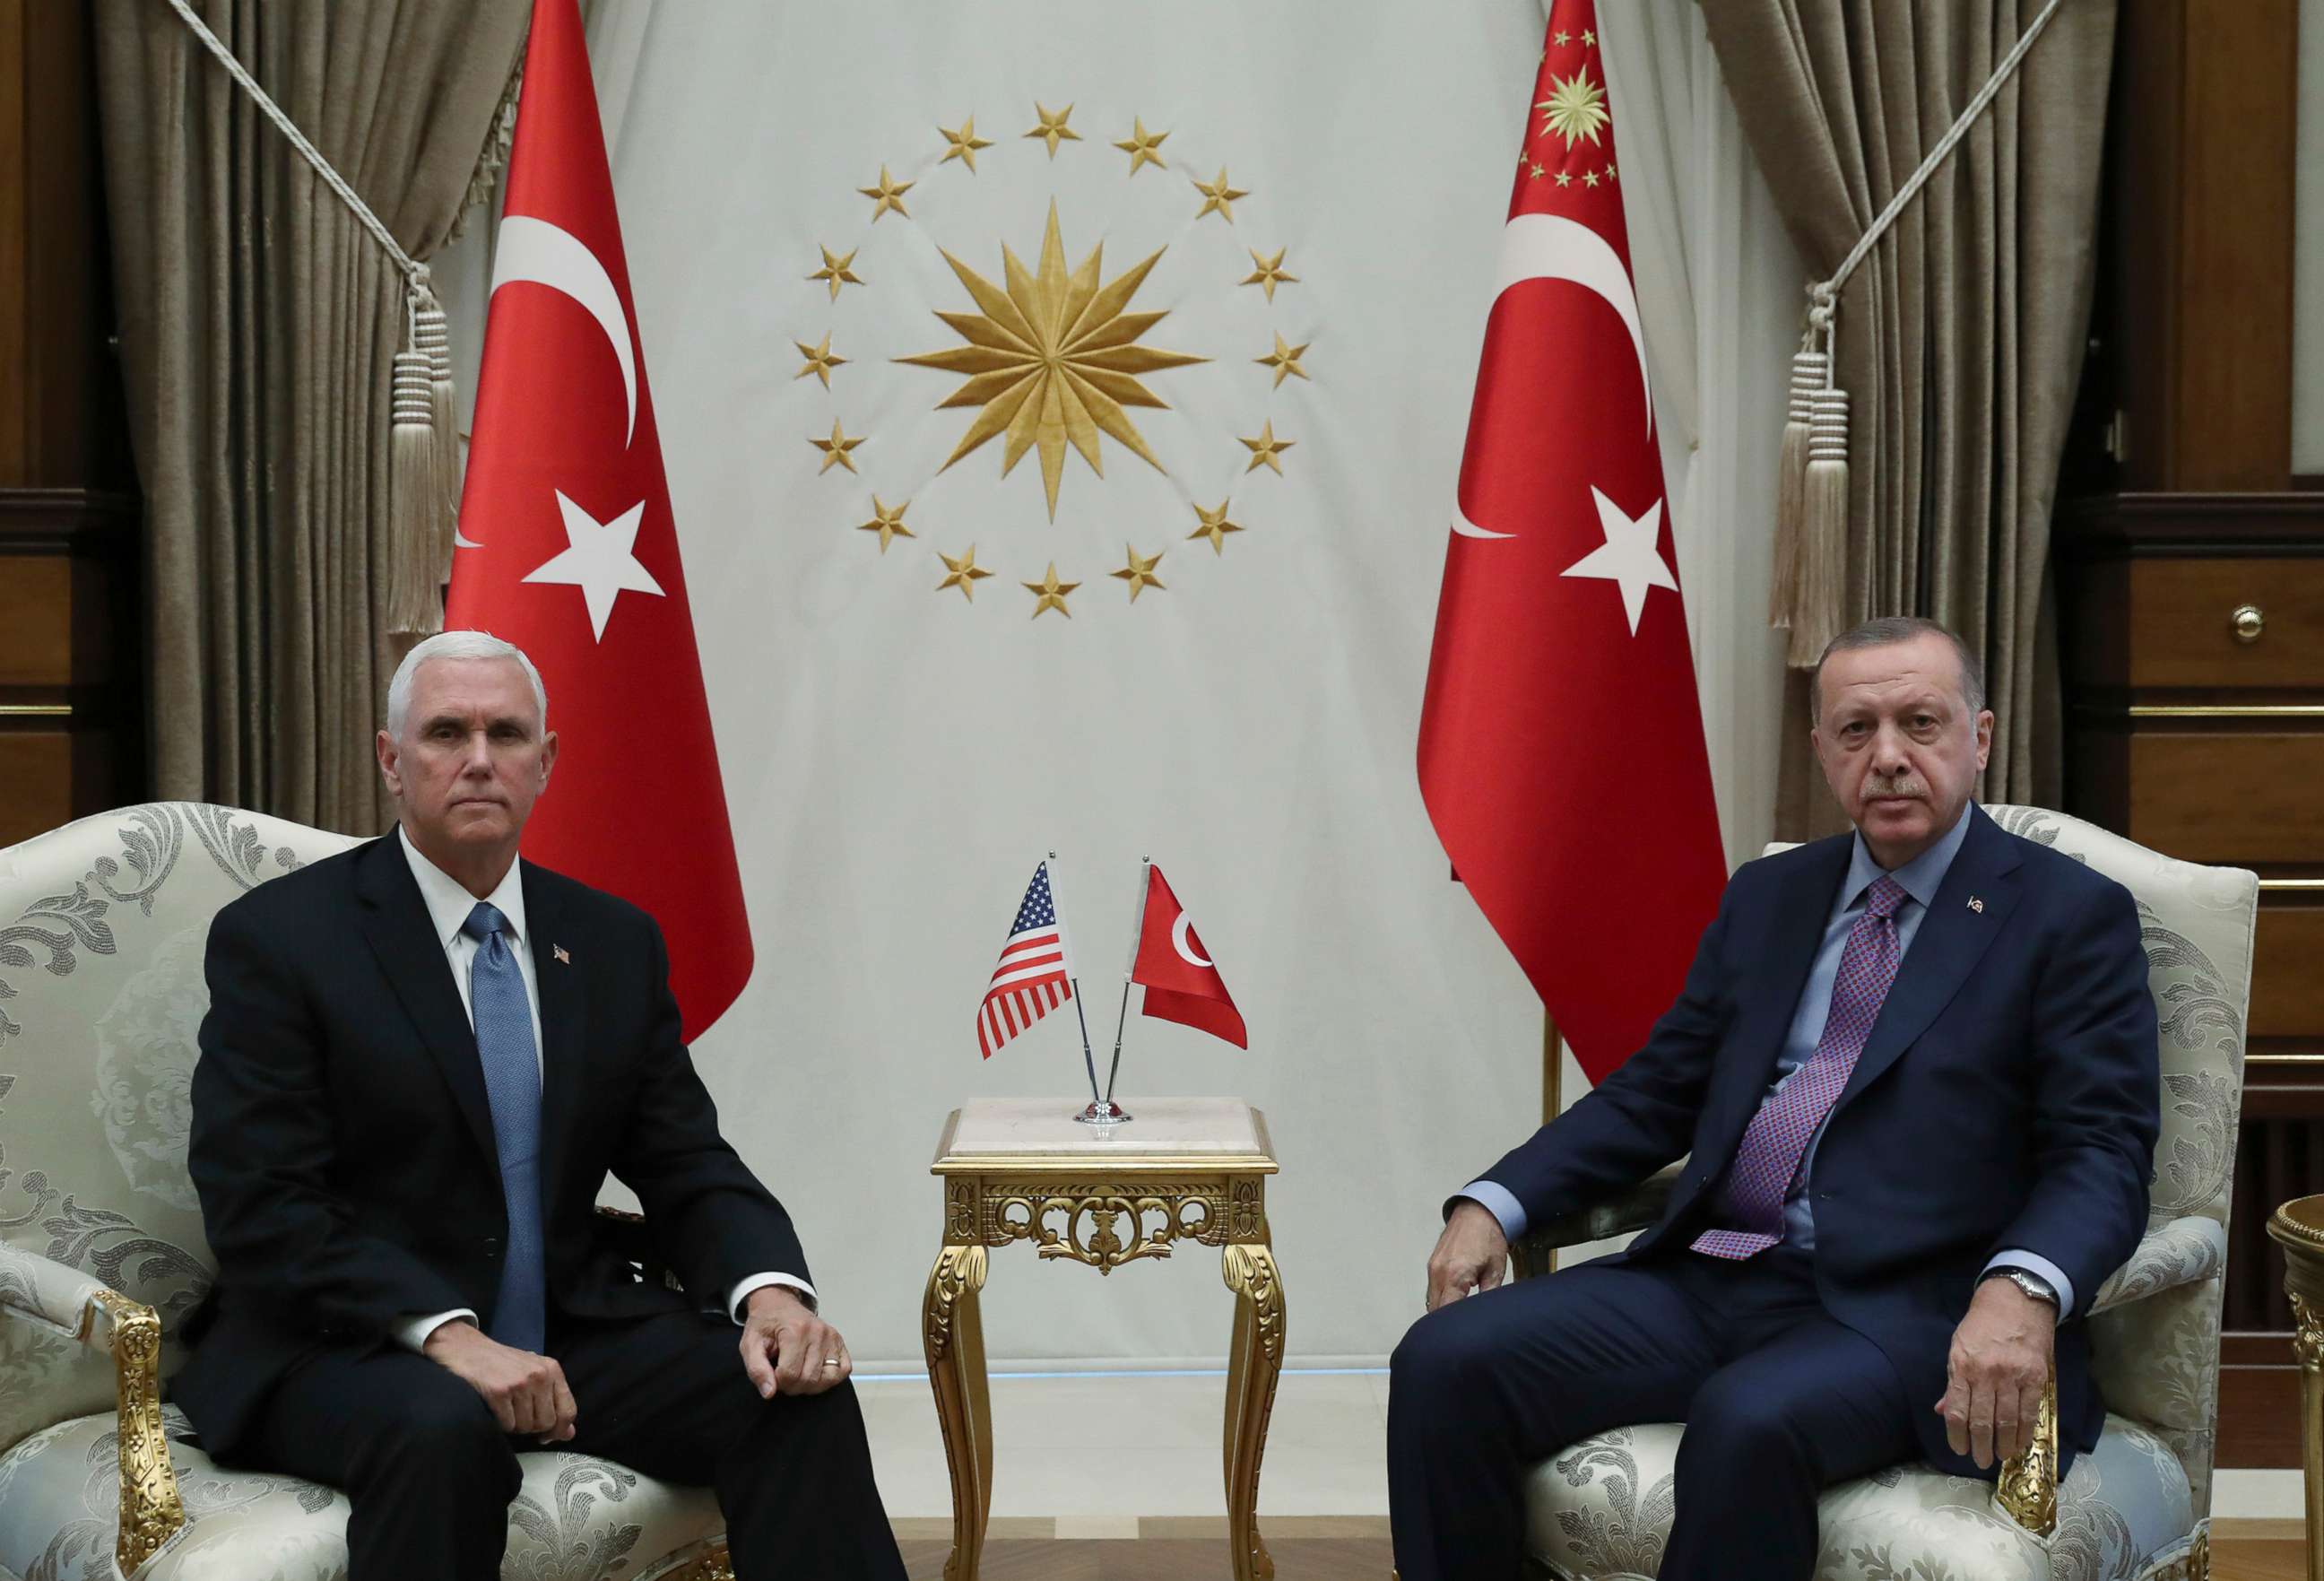 PHOTO: Vice President Mike Pence, left, and Turkish President Recep Tayyip Erdogan pose for photos before their talks at the presidential palace, in Ankara, Turkey, on Oct. 17, 2019.